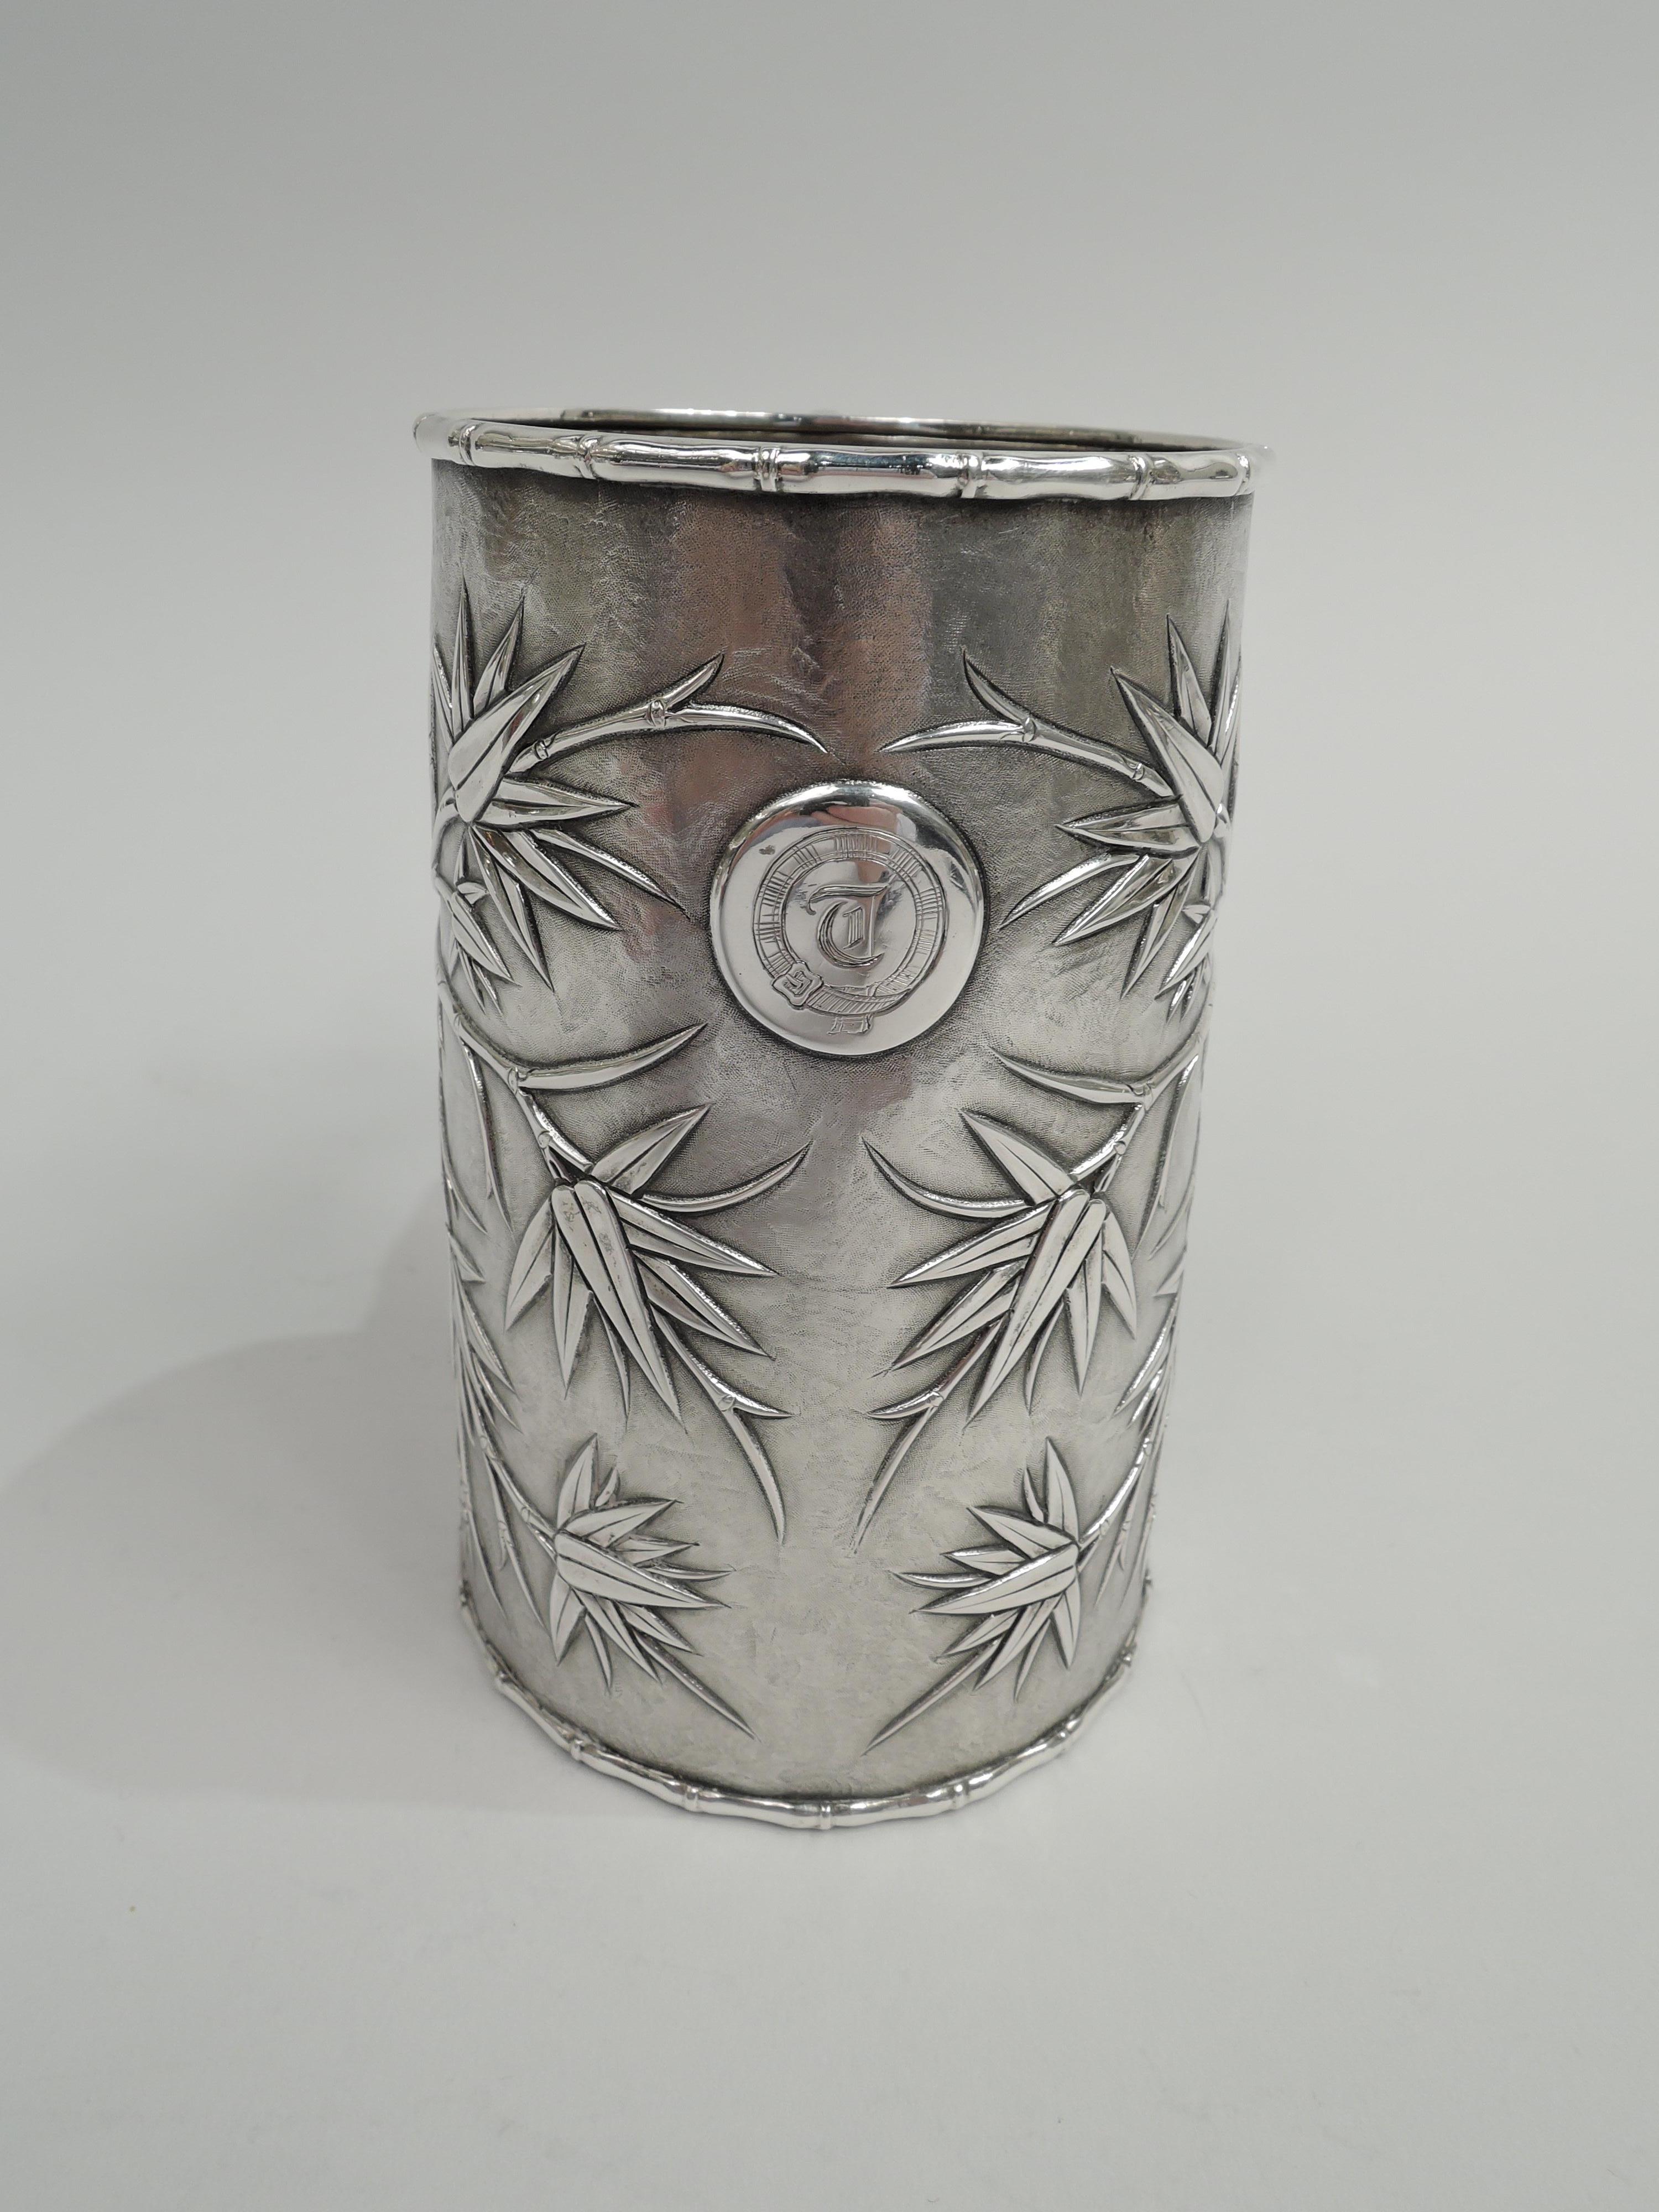 Chinese export silver mug, ca 1850. Straight and upward tapering sides applied with leafing bamboo on stippled ground. Branch-form handle and rims. Applied rondel engraved with single-letter monogram in buckled belt. On underside is engraved “H. J.